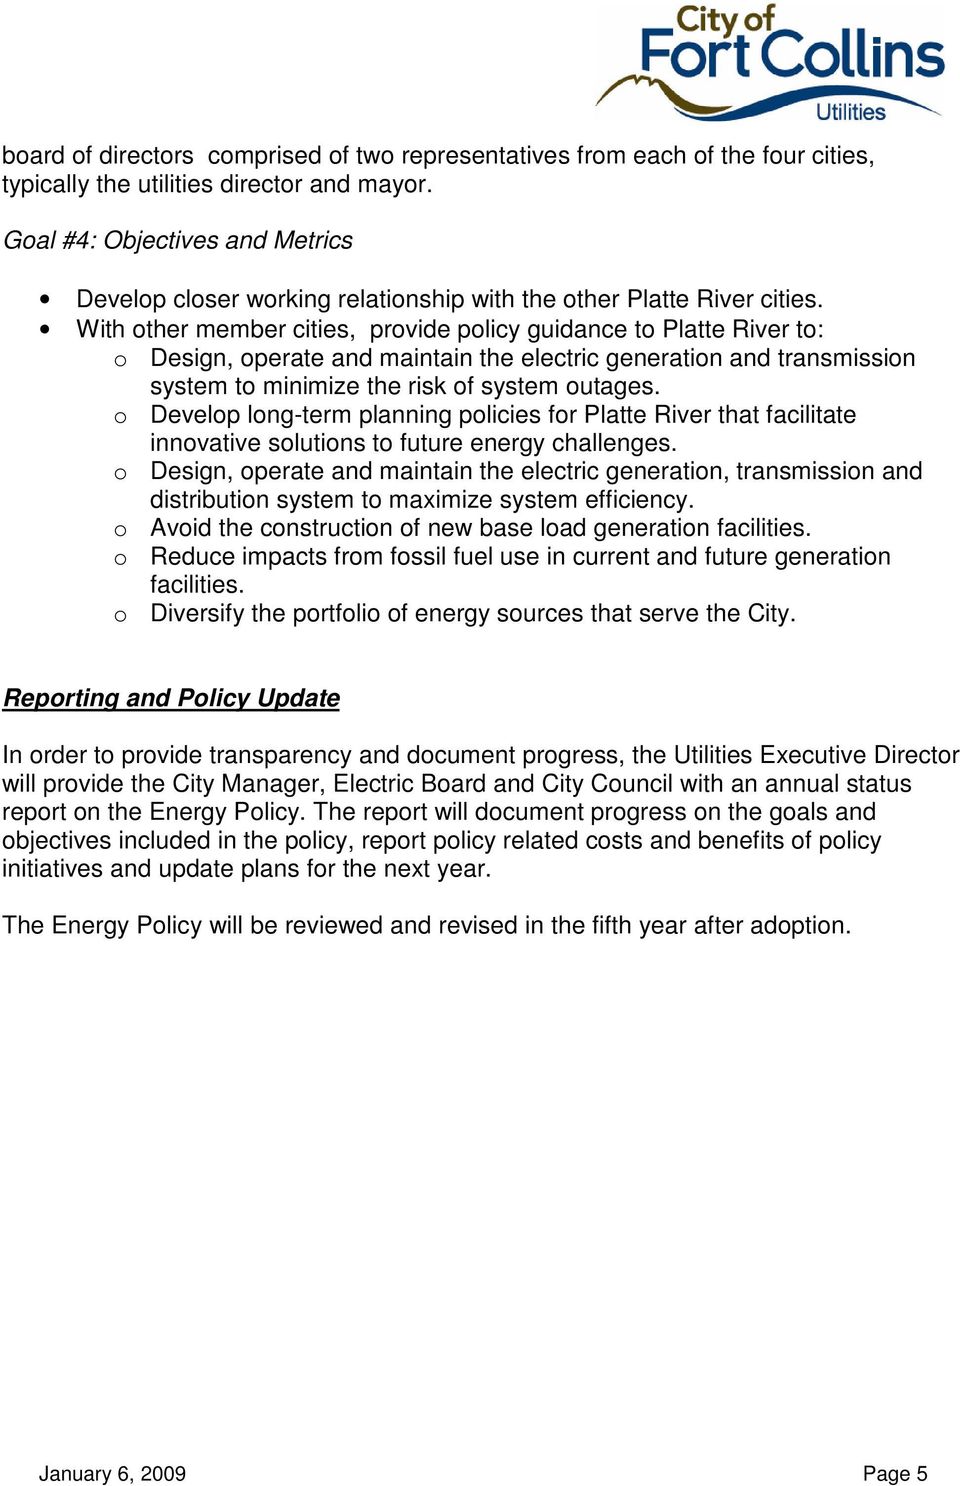 With other member cities, provide policy guidance to Platte River to: o Design, operate and maintain the electric generation and transmission system to minimize the risk of system outages.